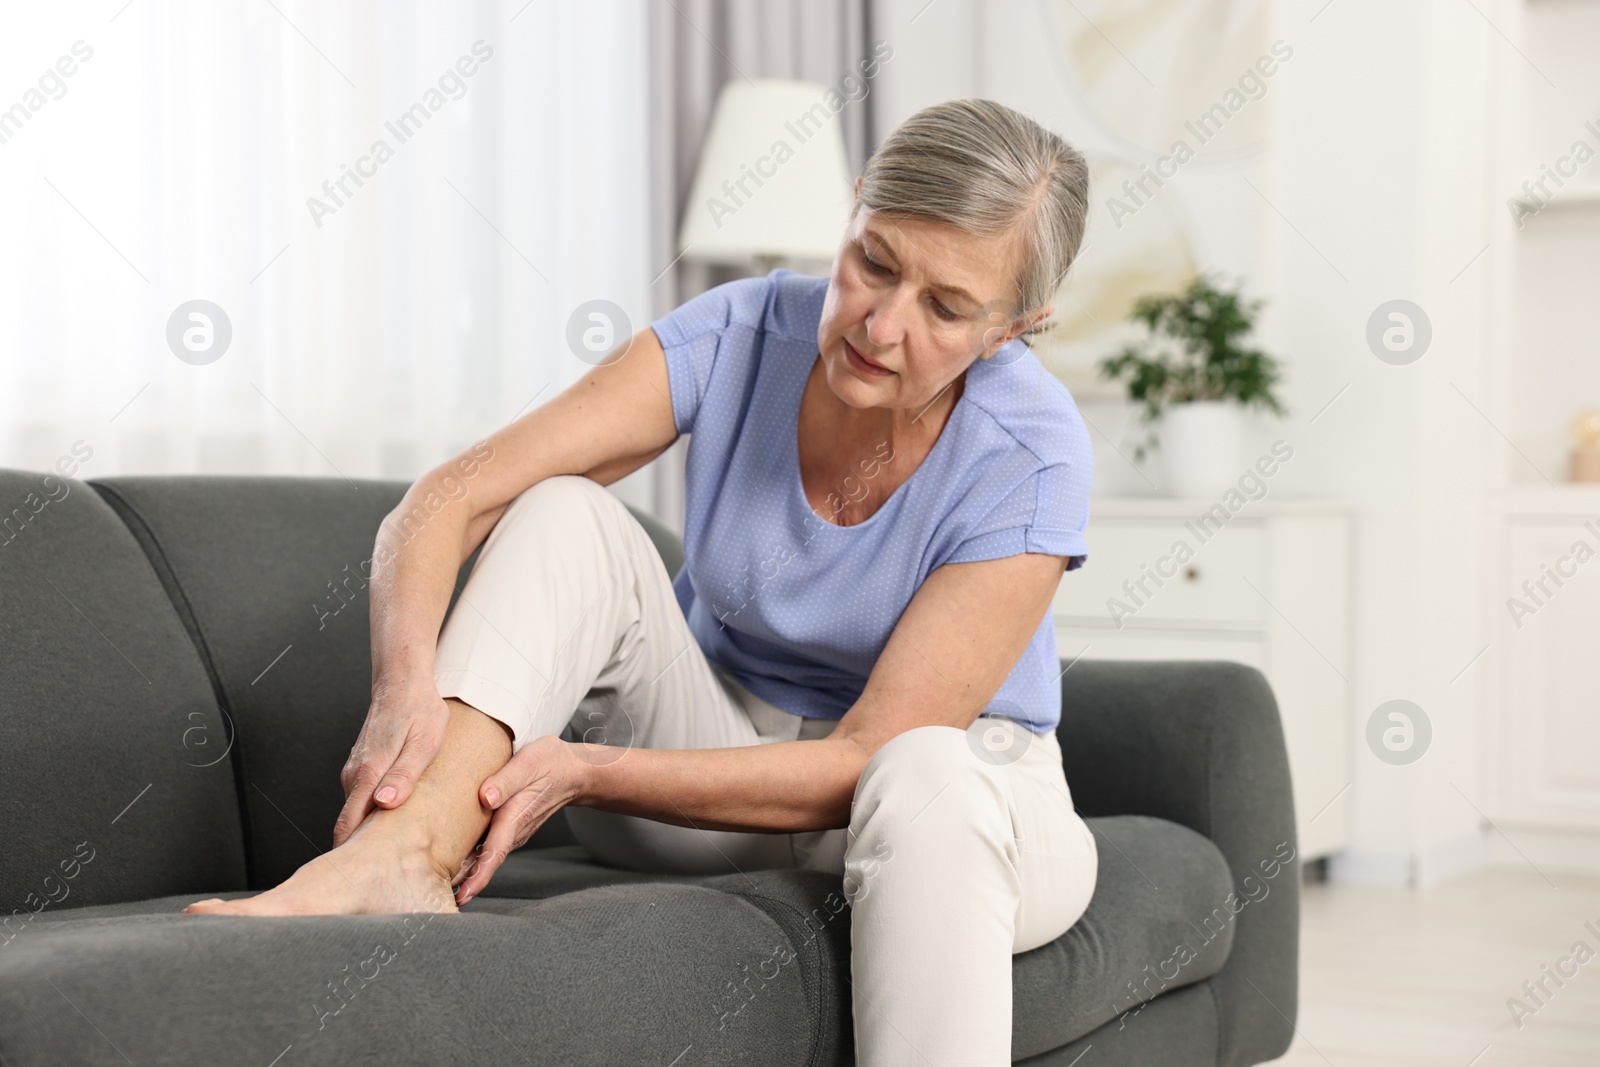 Photo of Arthritis symptoms. Woman suffering from pain in leg at home